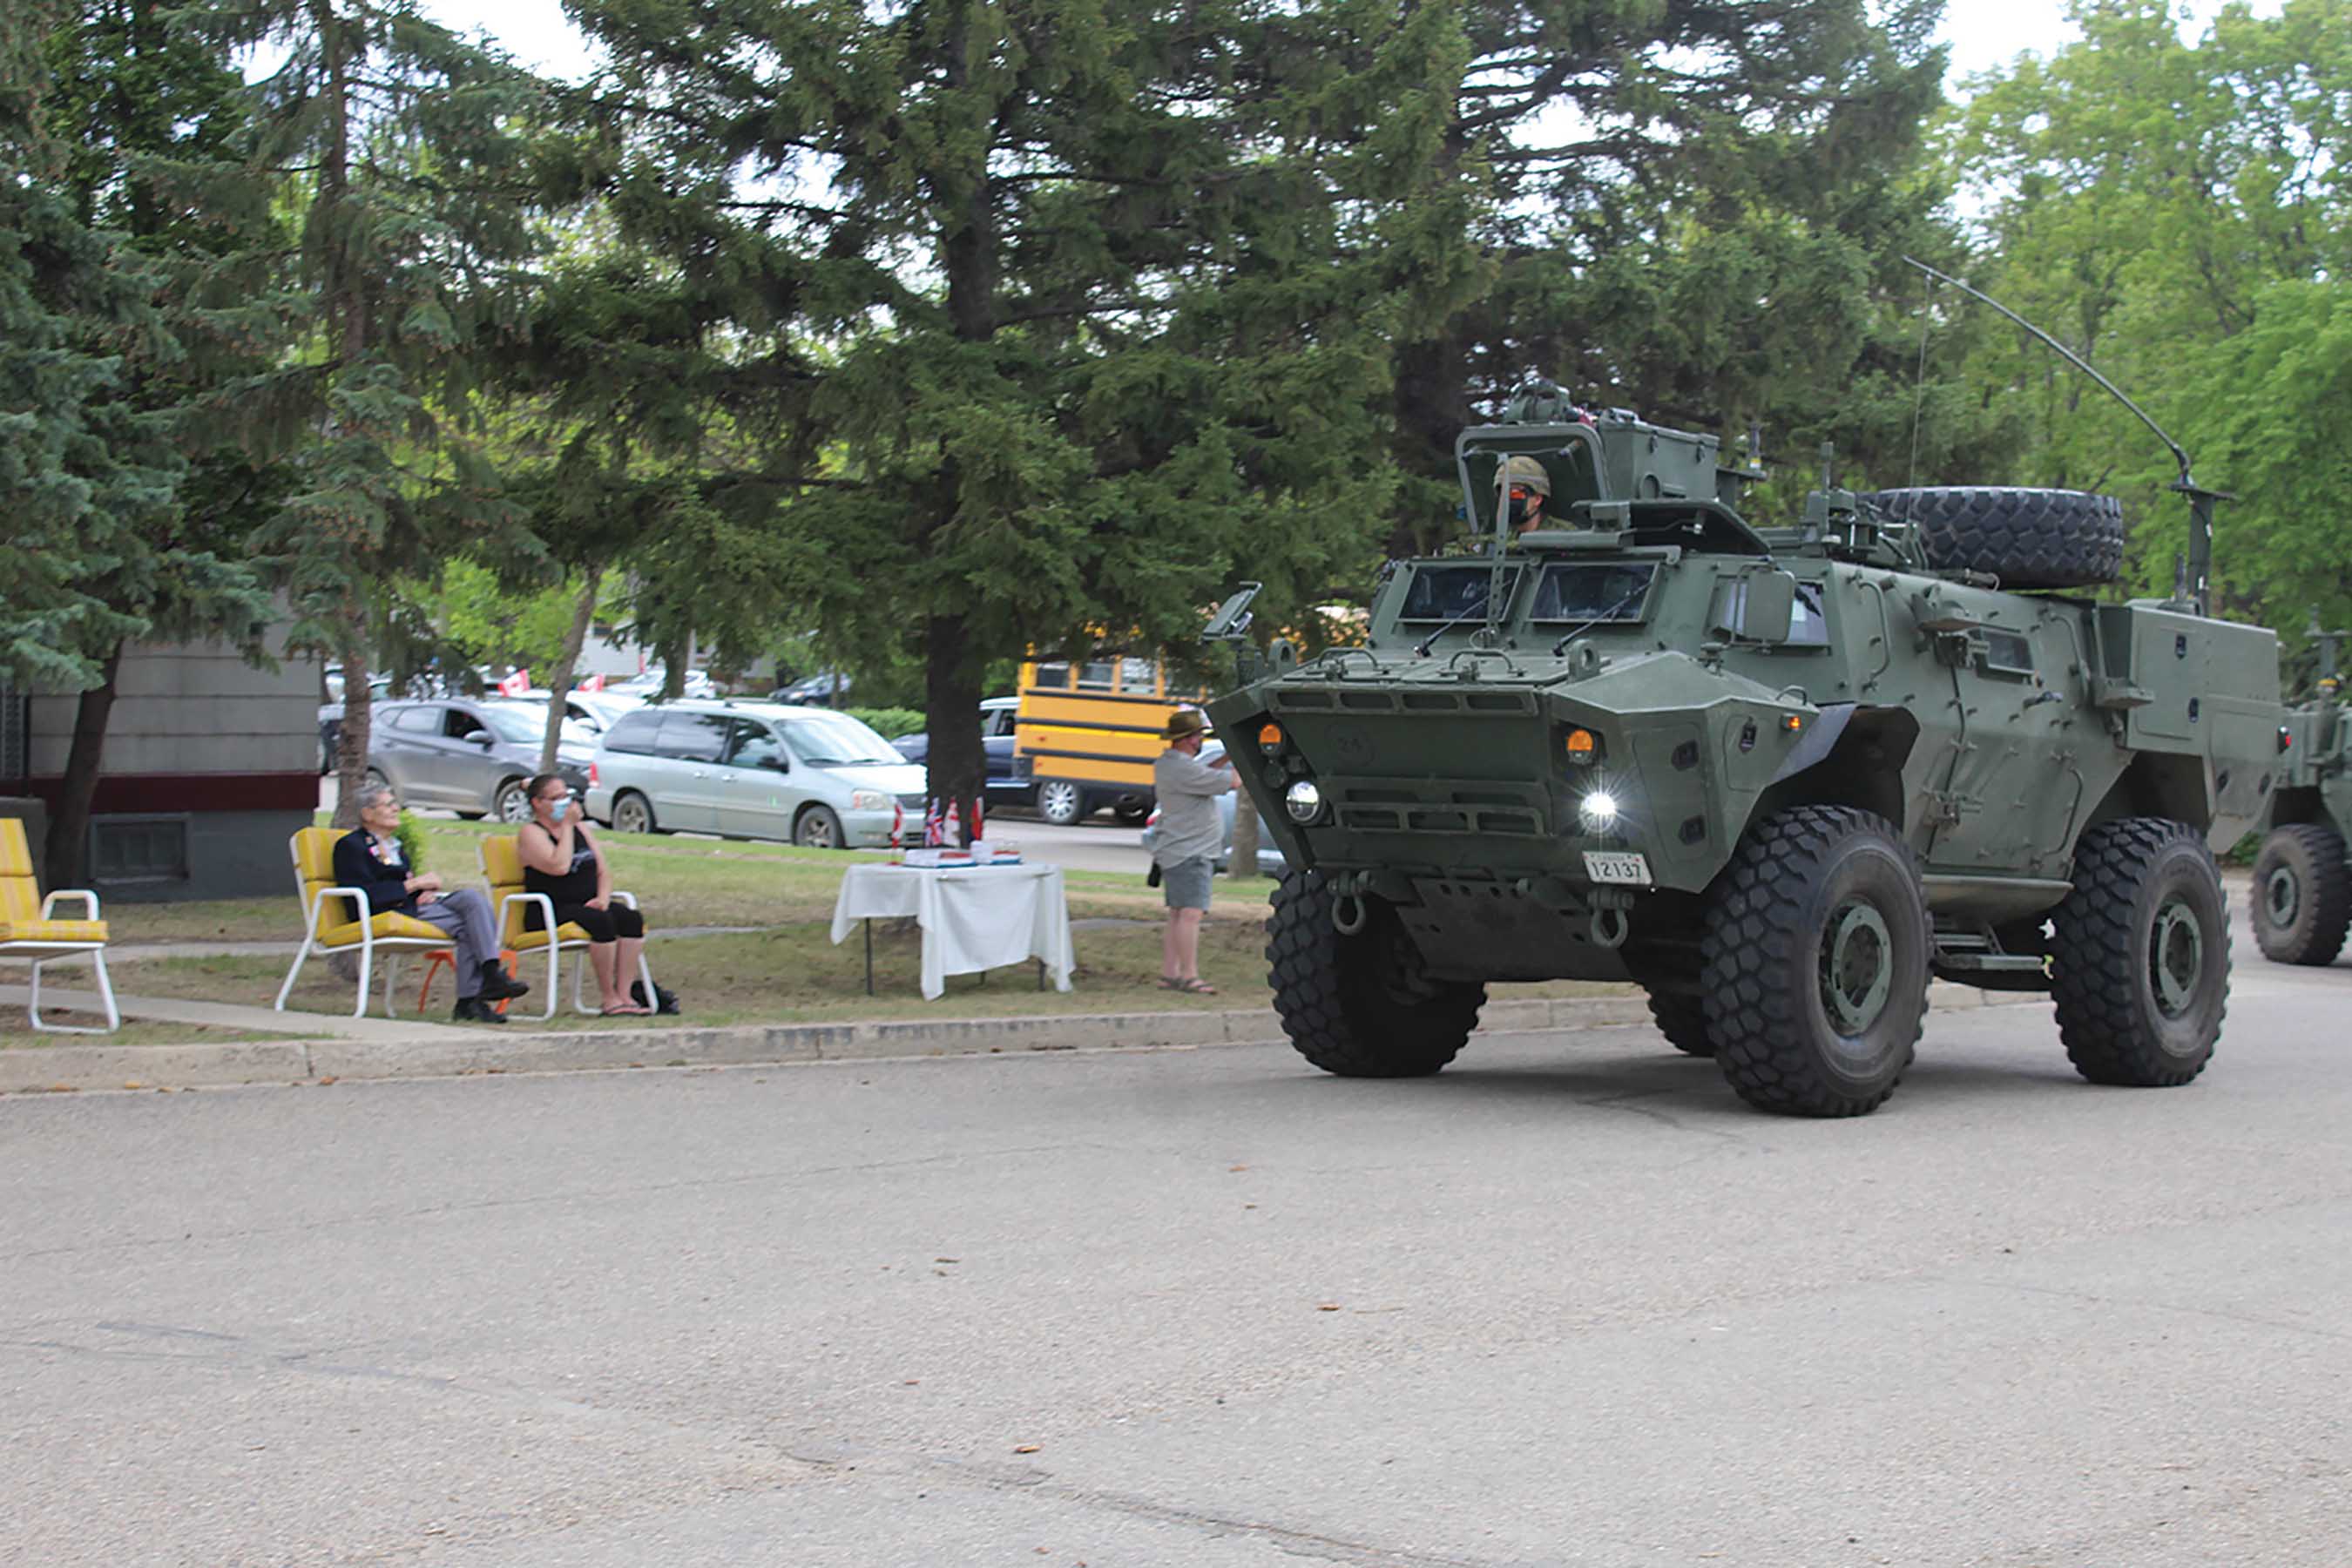 A LAV-3 Canadian Forces armored vehicle from CFB Shilo, one of two that took part in the parade to honour Les on his 100 birthday and his service to Canada in WWII.